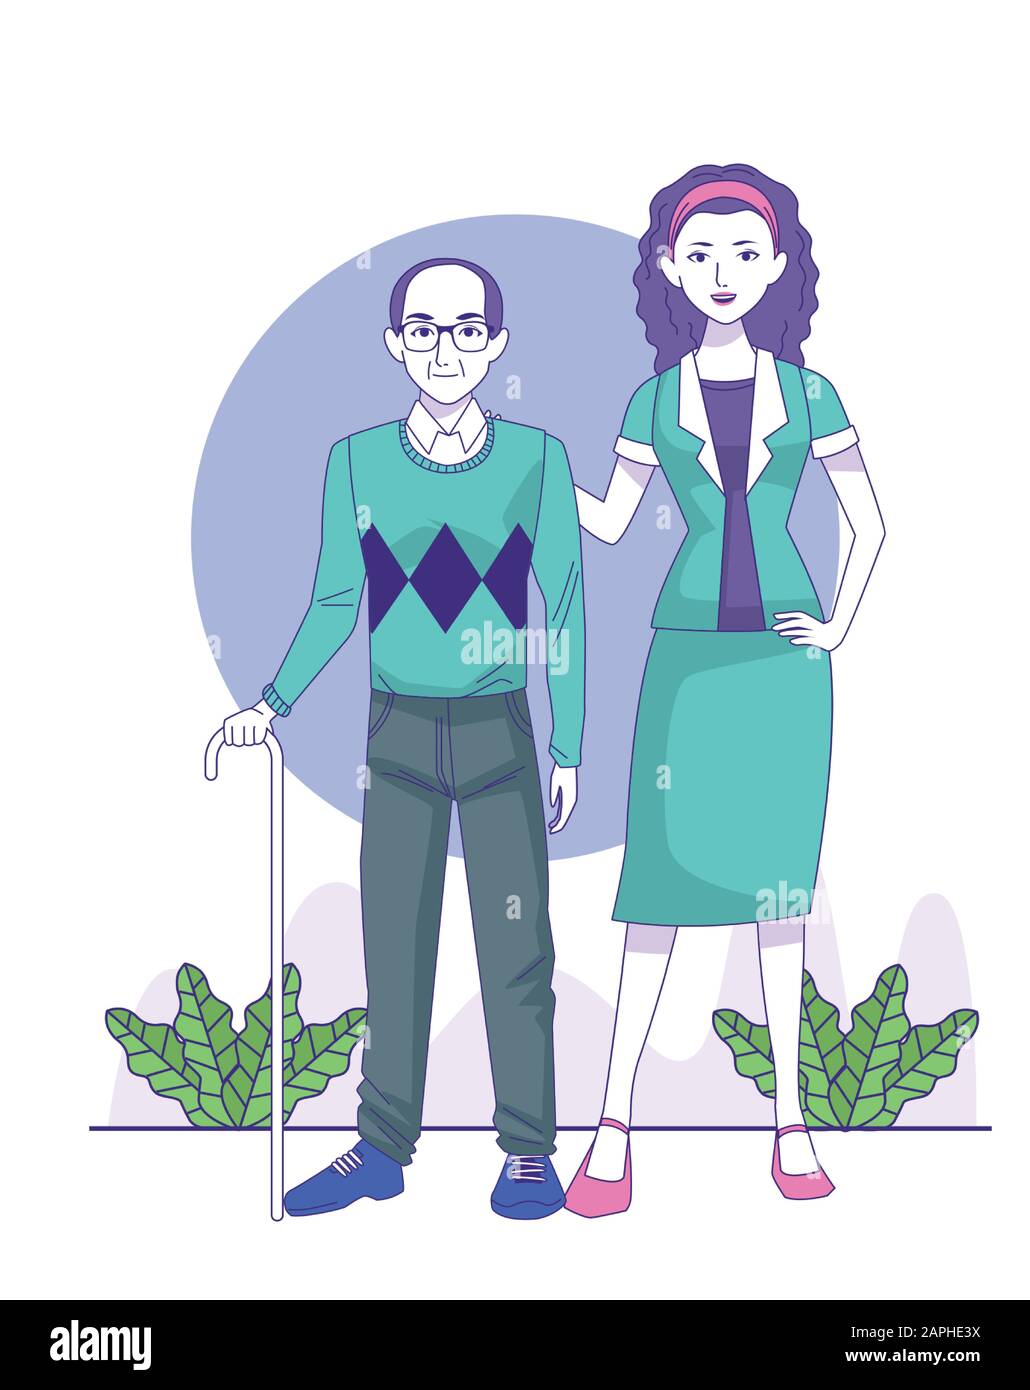 cartoon old man and woman standing, colorful design Stock Vector